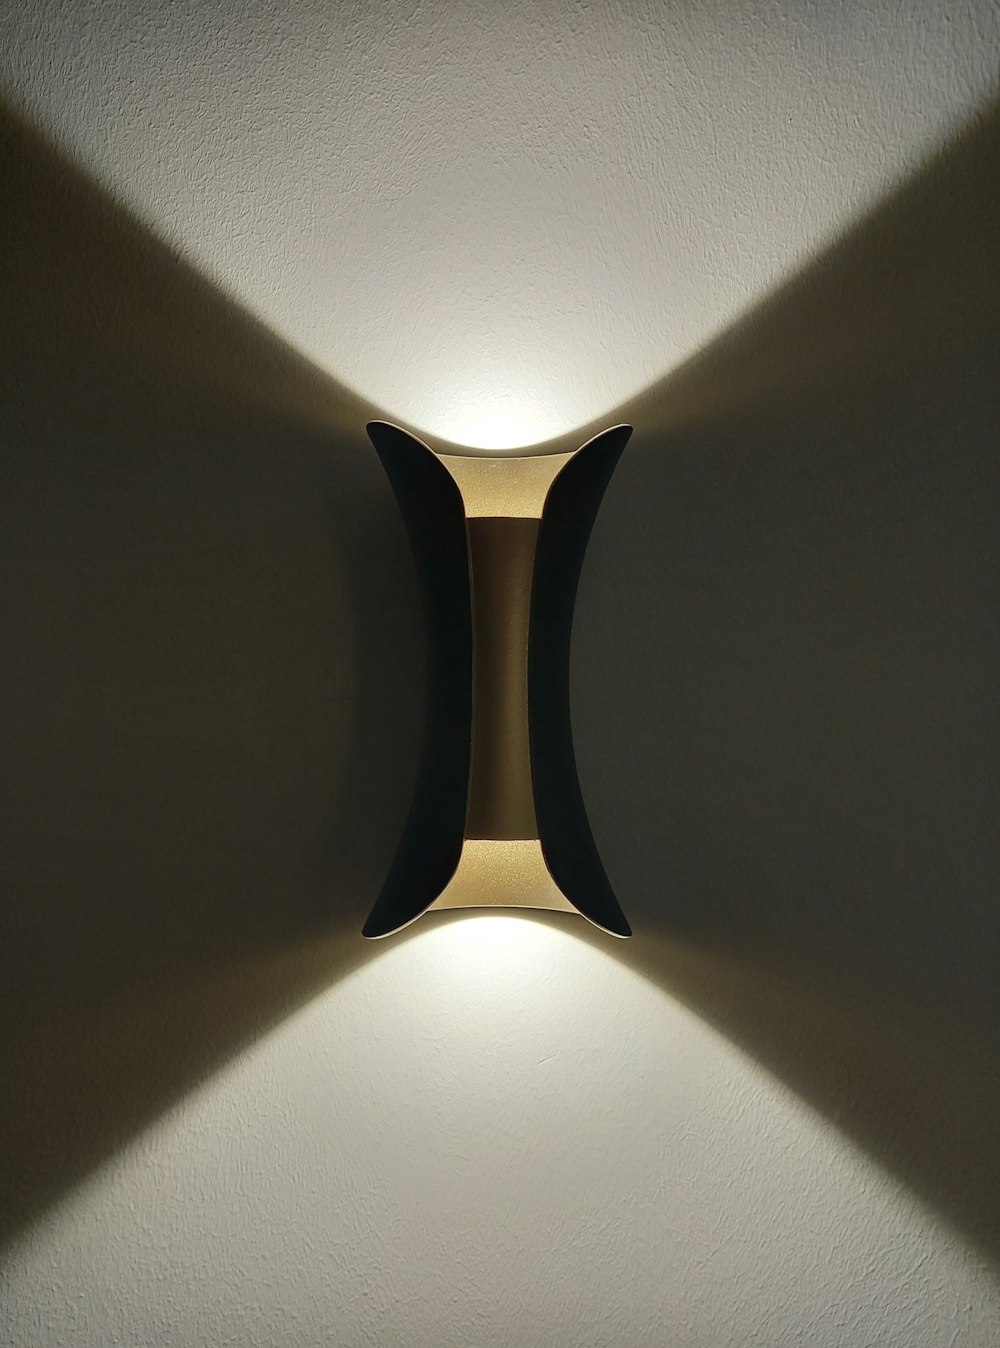 a close up of a light on a wall